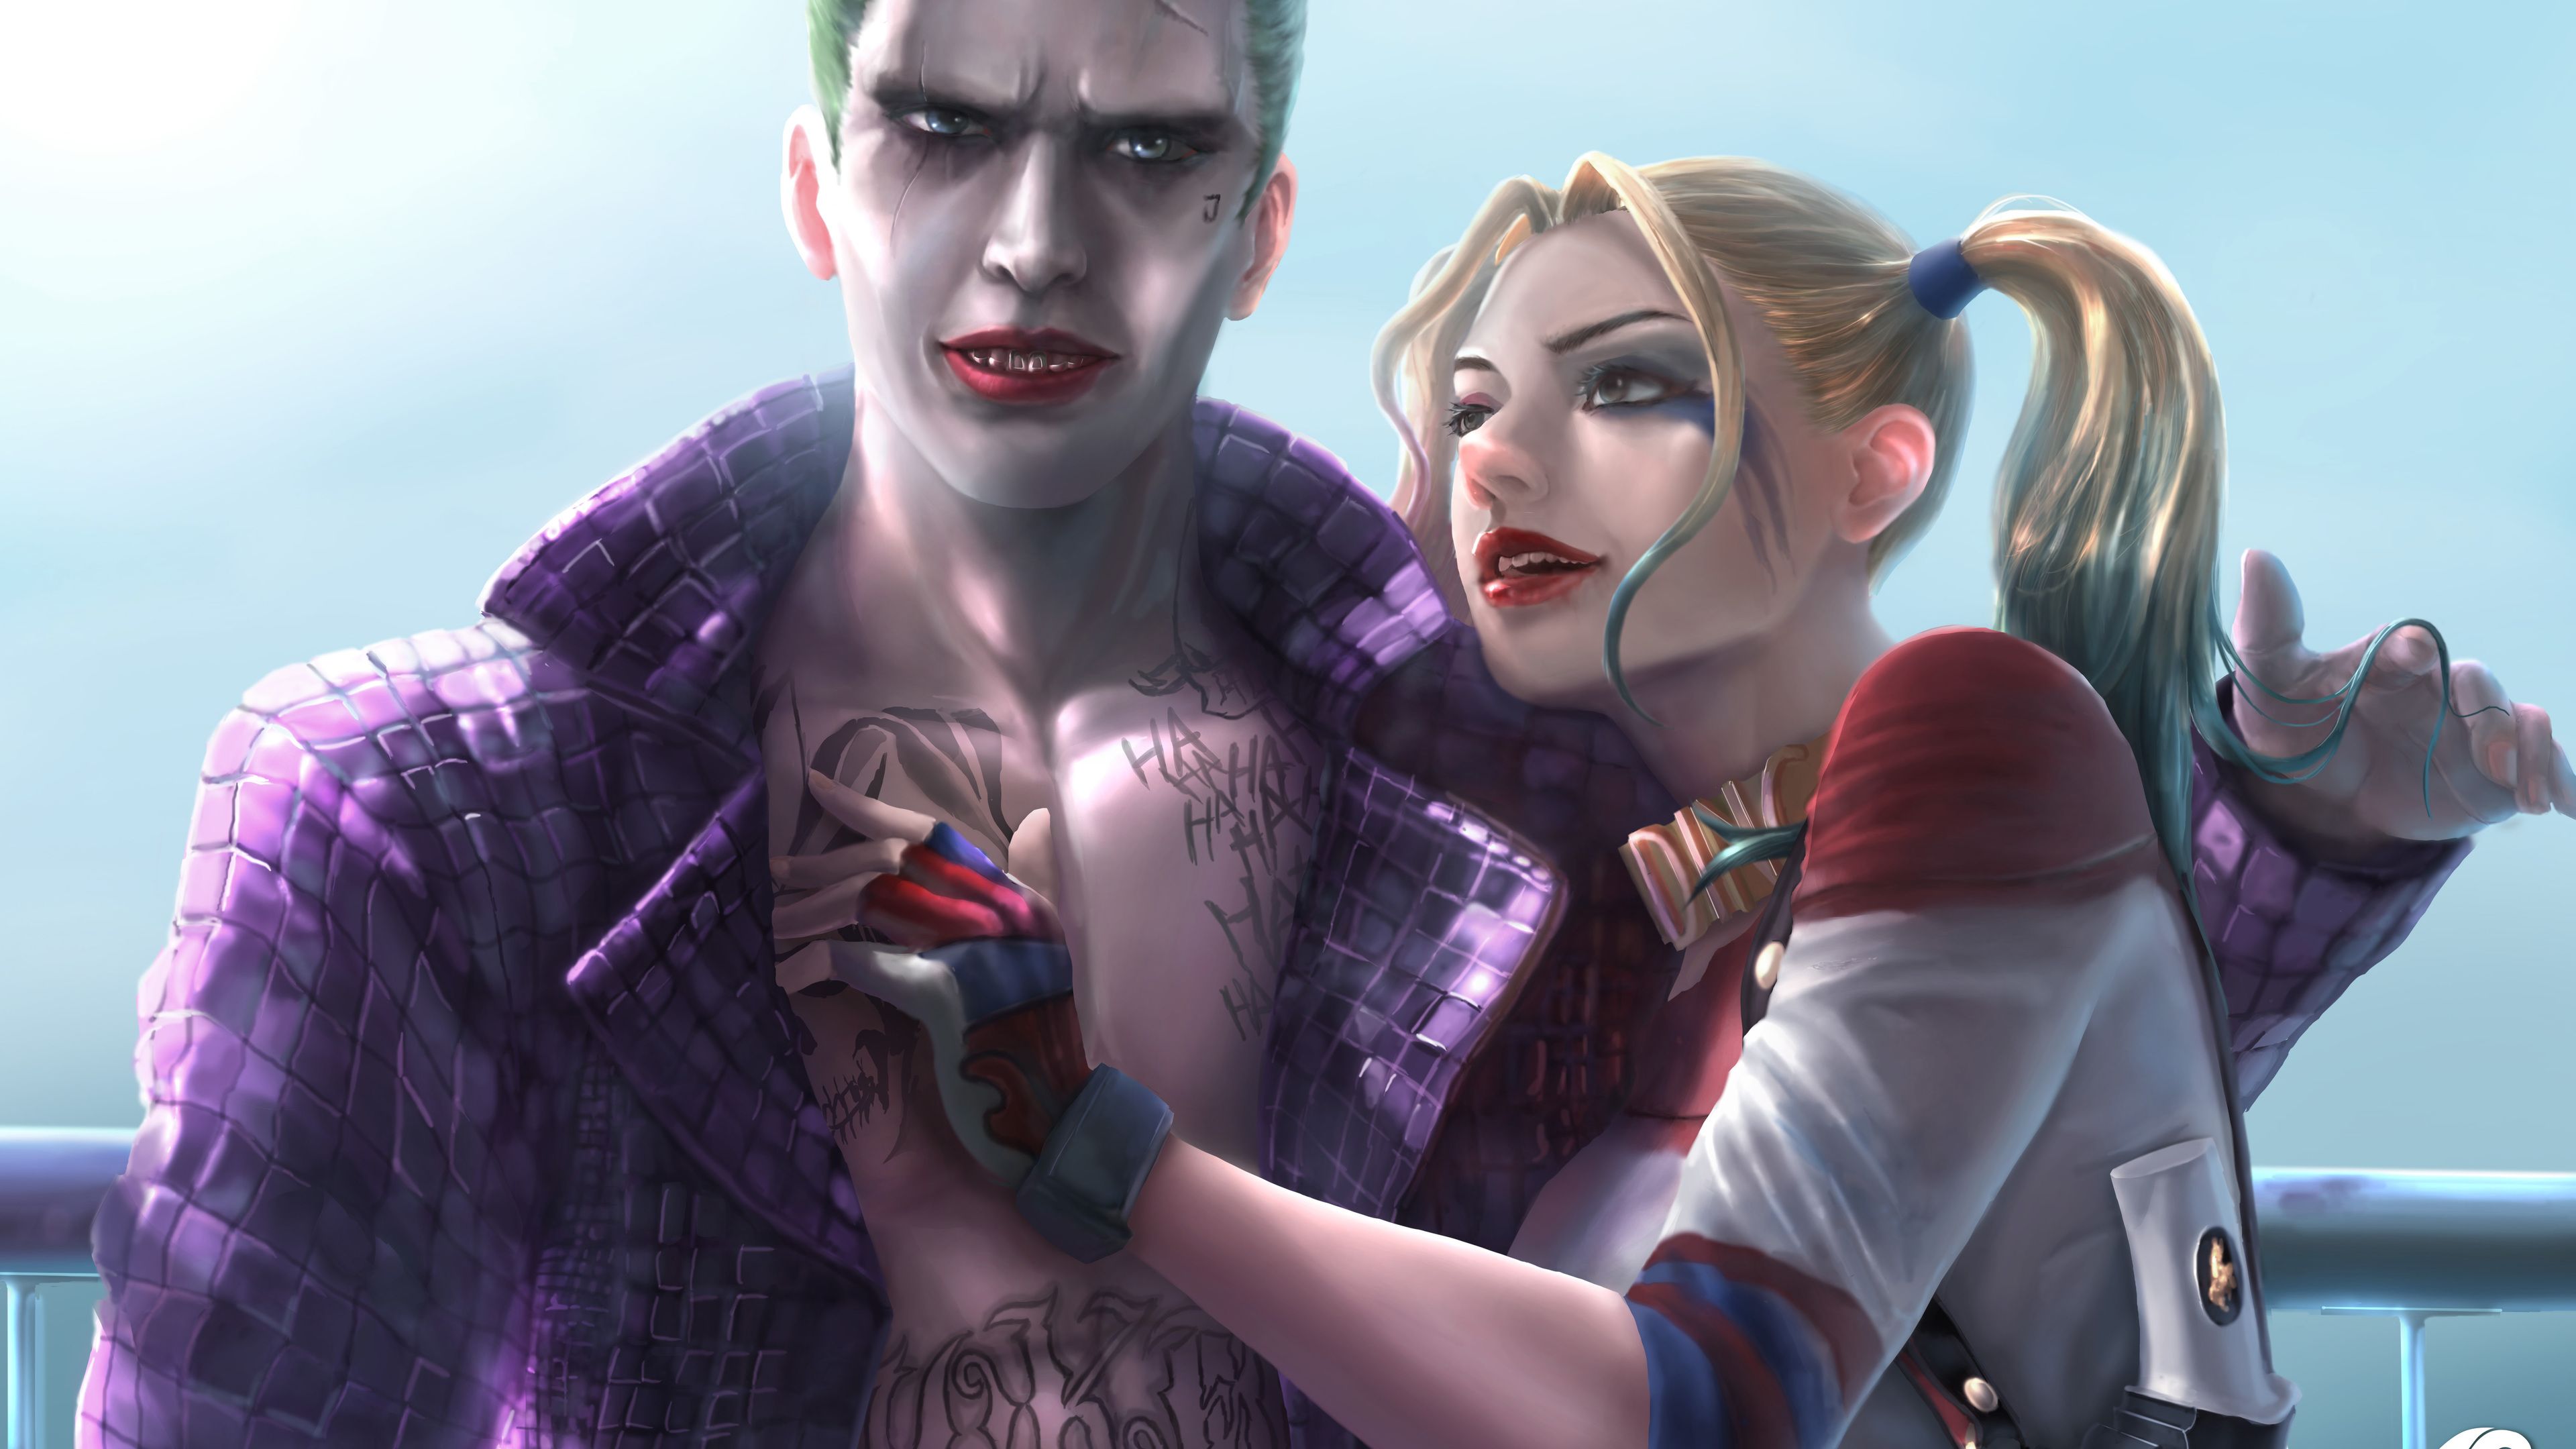 Harley Quinn And Joker Playing Games Wallpapers - Wallpaper Cave.